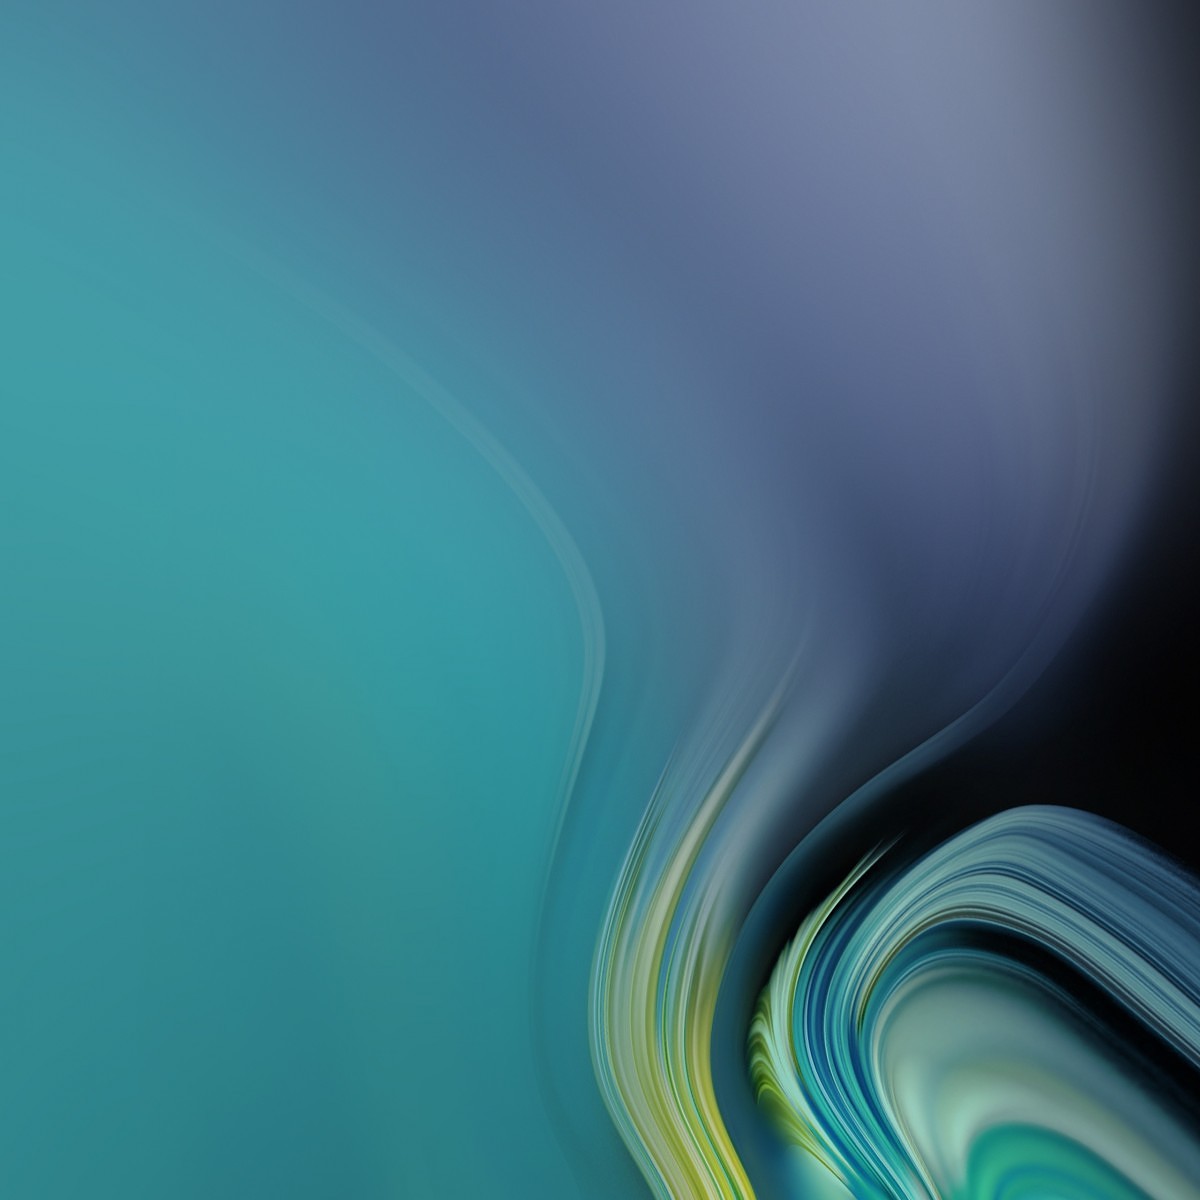 Samsung Galaxy Note Wallpaper Now Available For